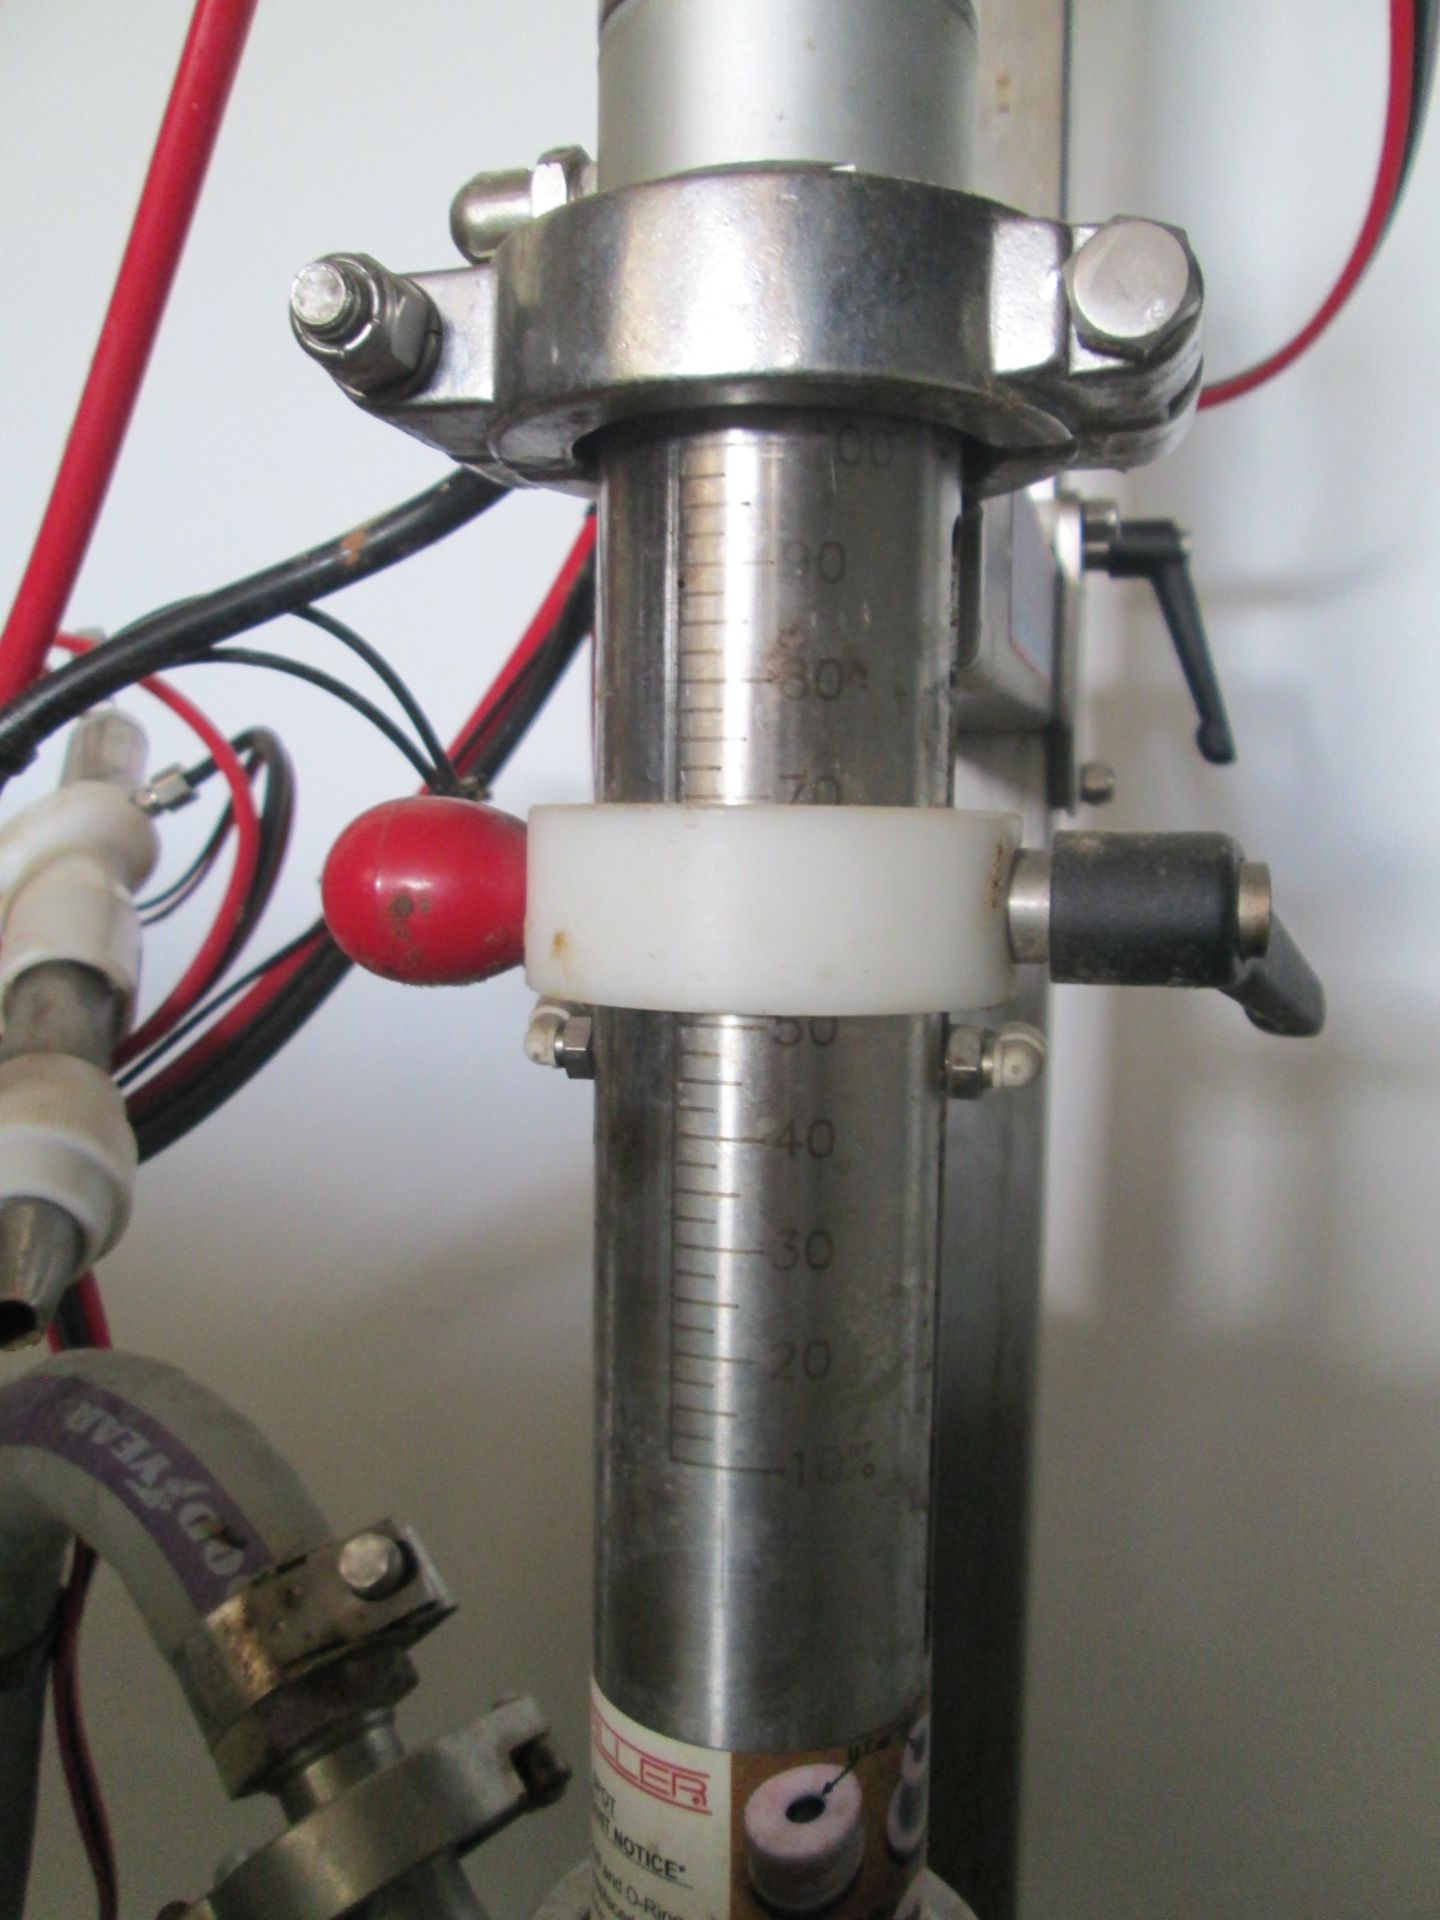 Unifiller Systems Inc, Stainless Steel Single Nozzle "SPOT" Filler. Stainless Steel Construction, - Image 9 of 19